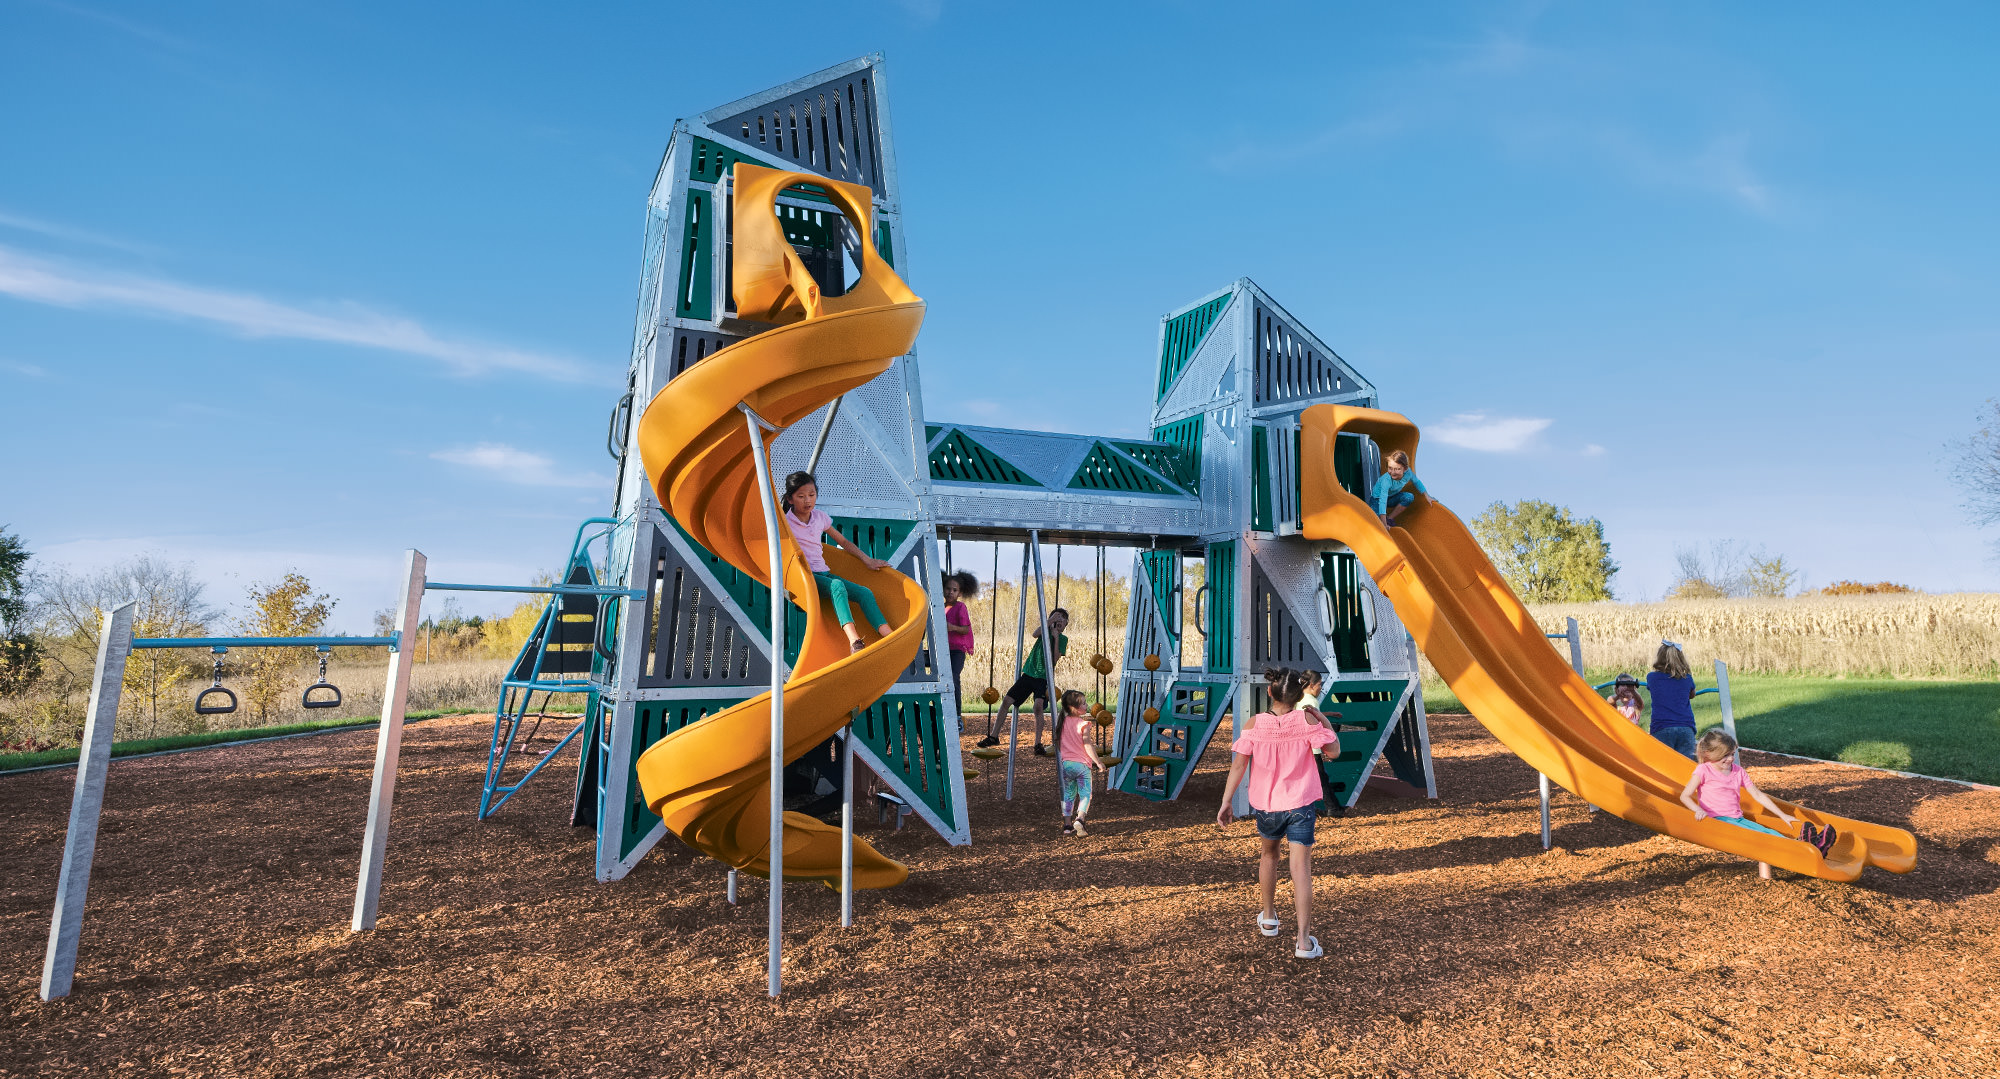 Alpha, the new play structure from Landscape Structures - URBADIS